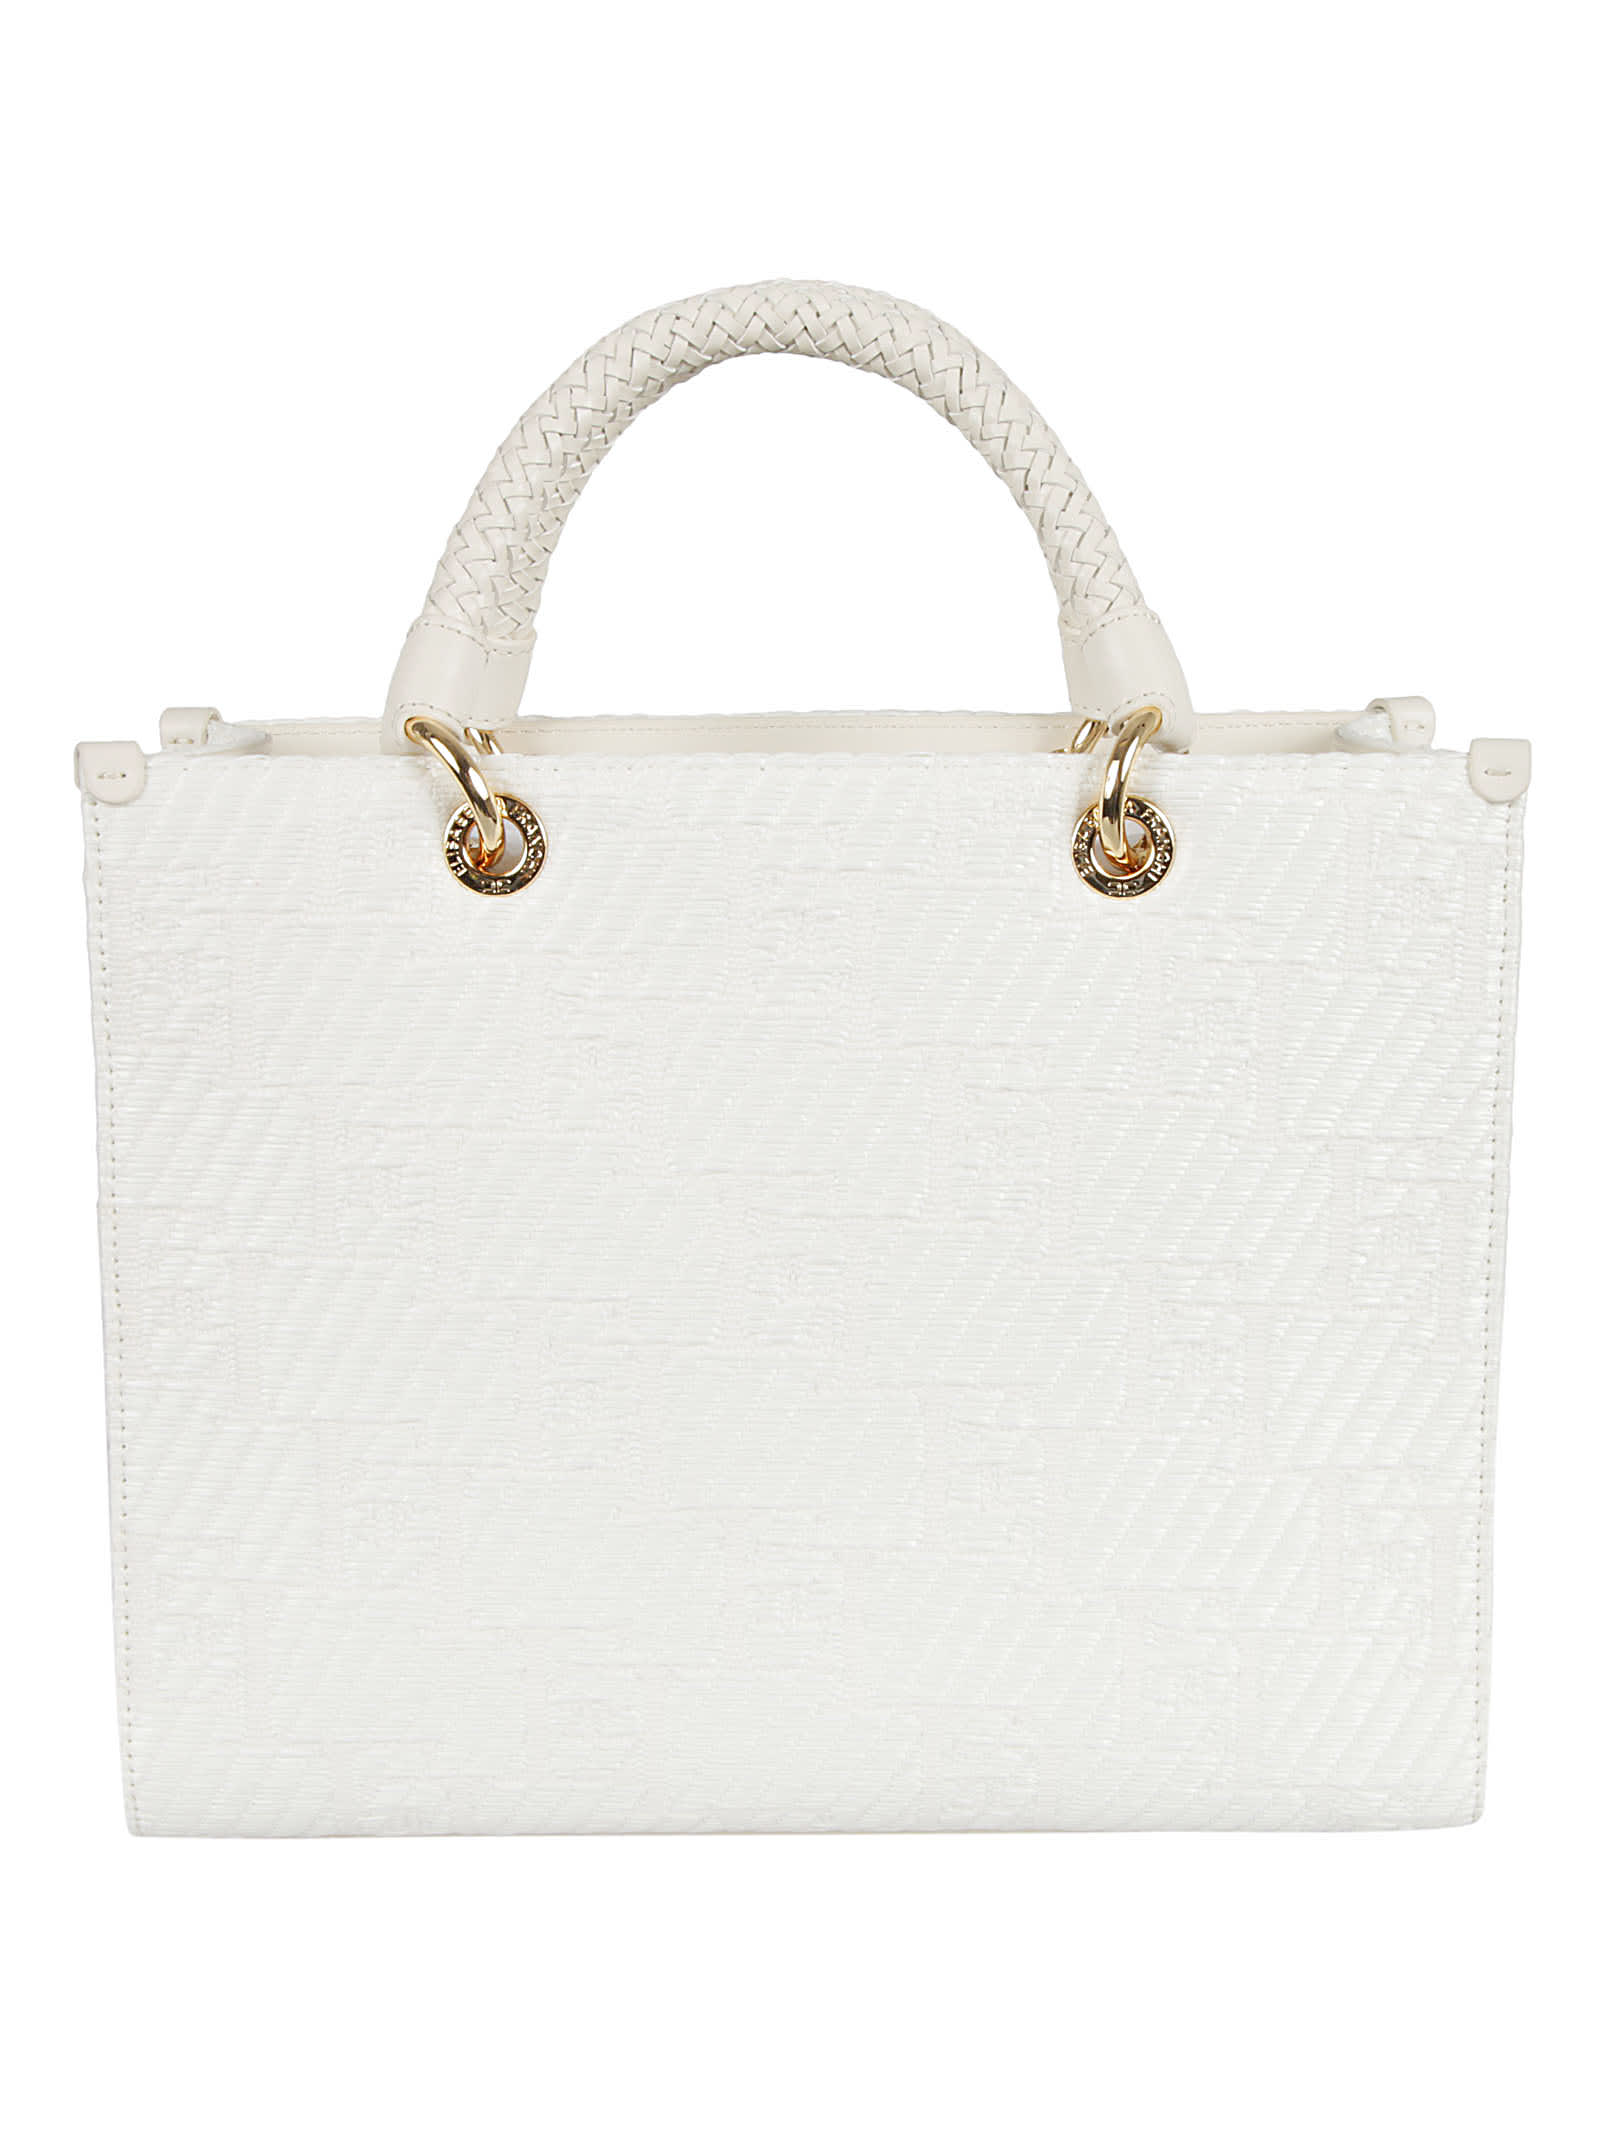 Elisabetta Franchi Woven Top Handle Patterned Tote In Avorio